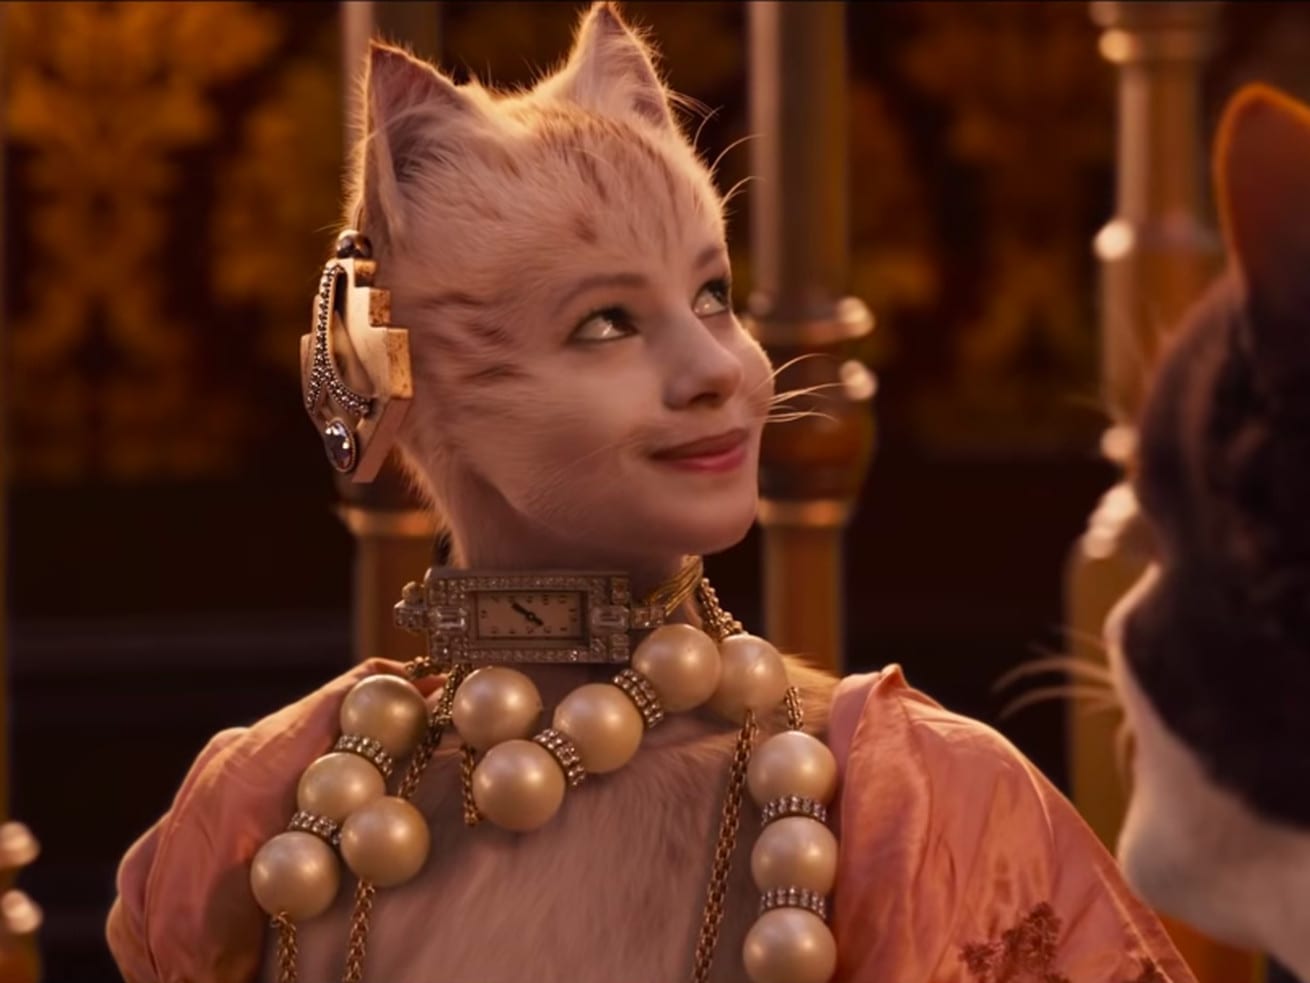 The movie Cats doesn’t even know what the musical Cats is about